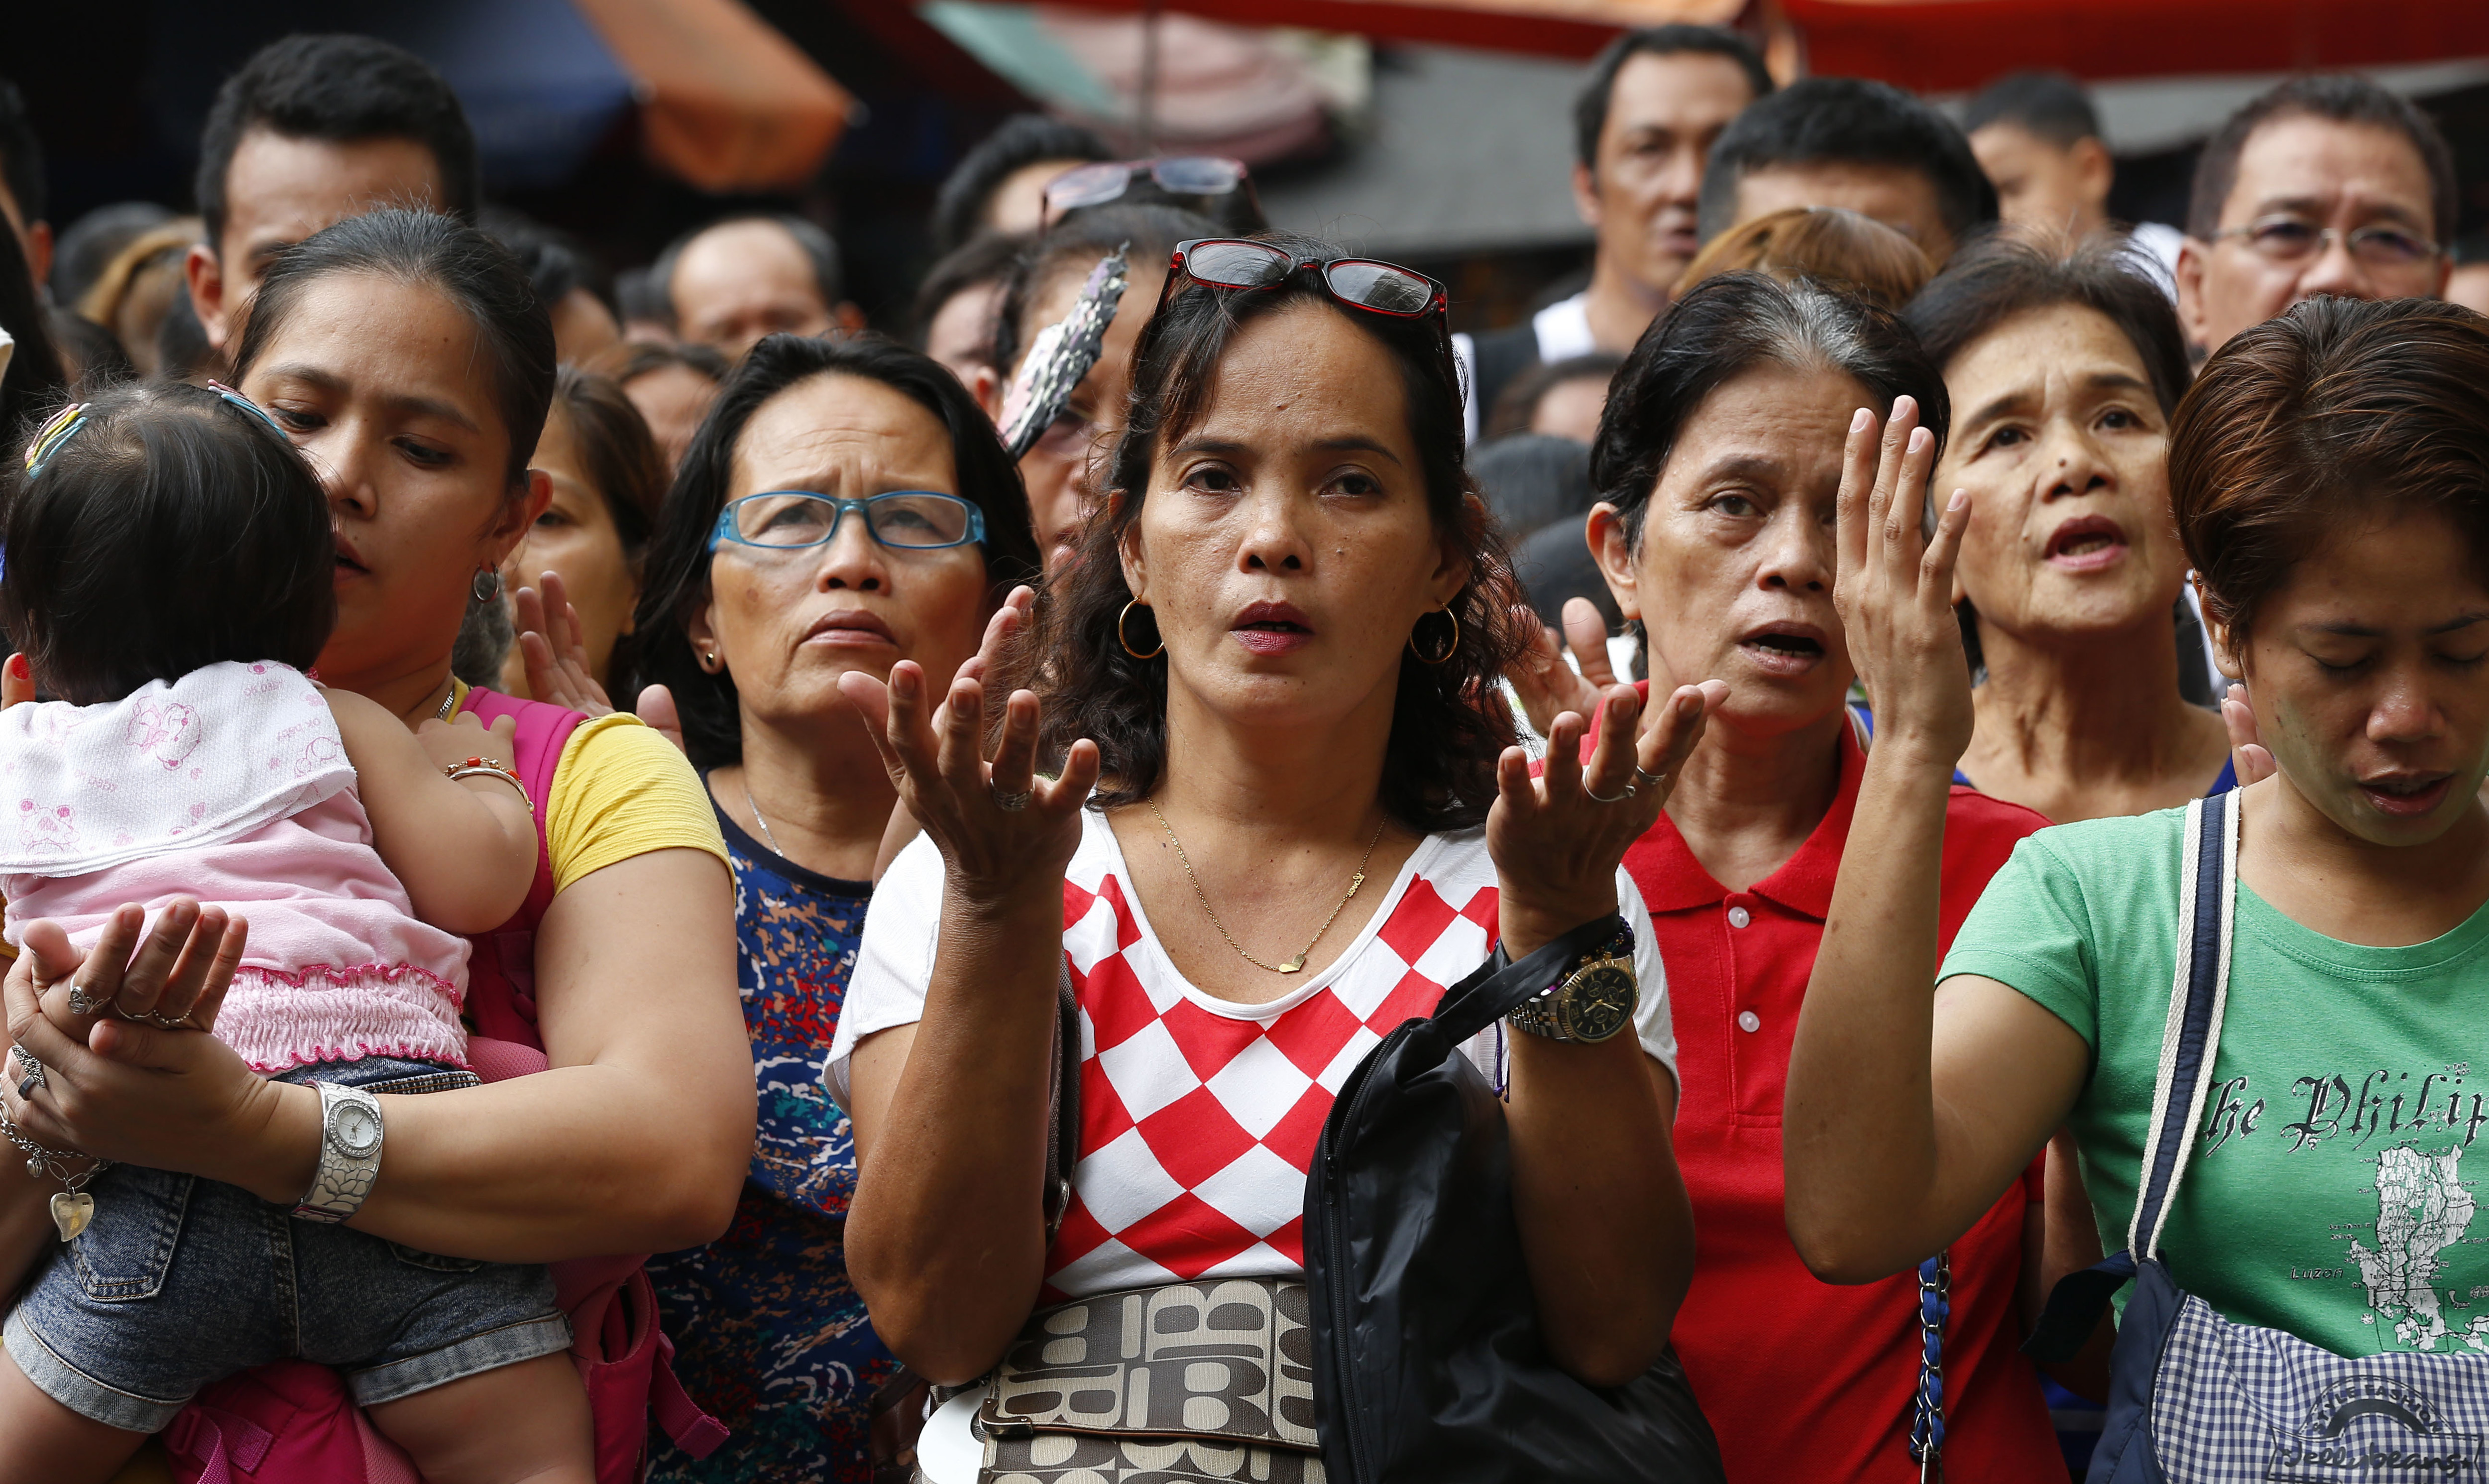 Hundreds of Roman Catholics pray at mass at the Quiapo church ahead of the celebration of the feast day of the Black Nazarene, Friday, Jan. 5, 2018, in Manila, Philippines. Hundreds of thousands of devotees are expected to take part in Tuesday's long, barefoot and raucous procession around the Manila streets. (AP Photo/Bullit Marquez)